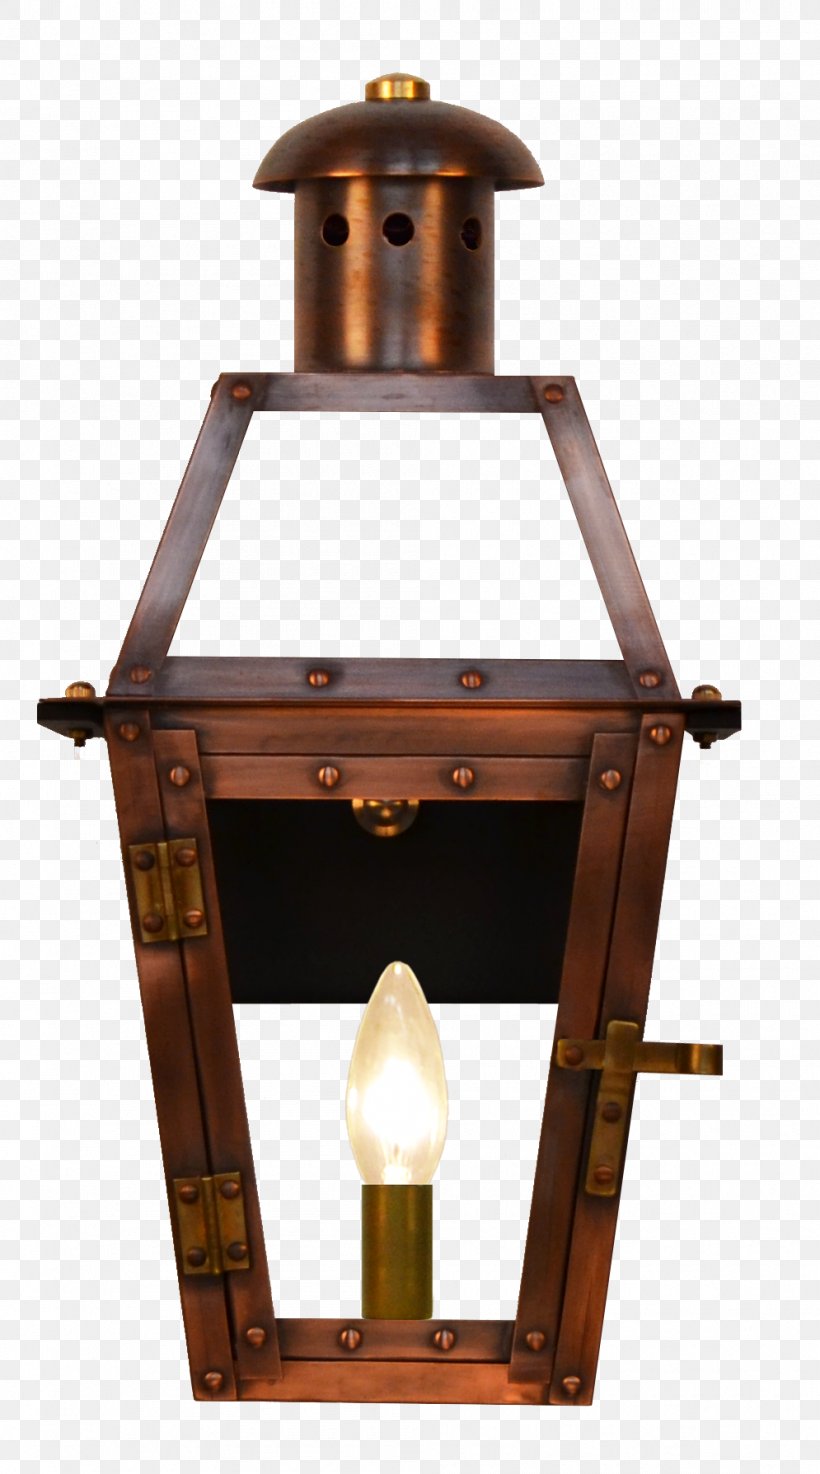 Gas Lighting Light Fixture Lantern, PNG, 995x1789px, Light, Bedroom, Ceiling, Ceiling Fixture, Coppersmith Download Free